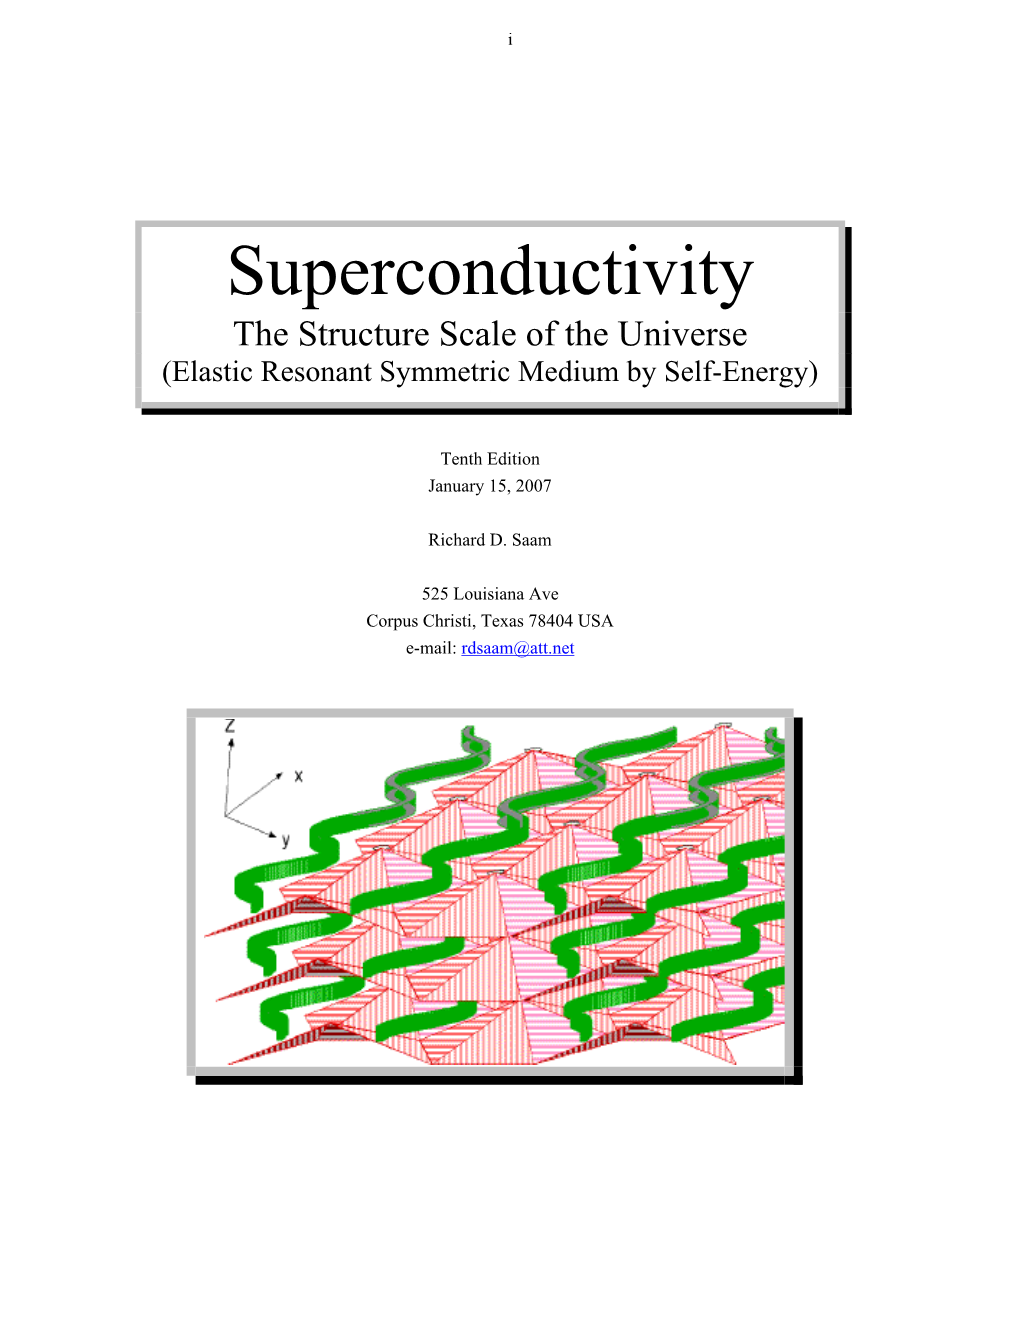 Superconductivity the Structure Scale of the Universe (Elastic Resonant Symmetric Medium by Self-Energy) A